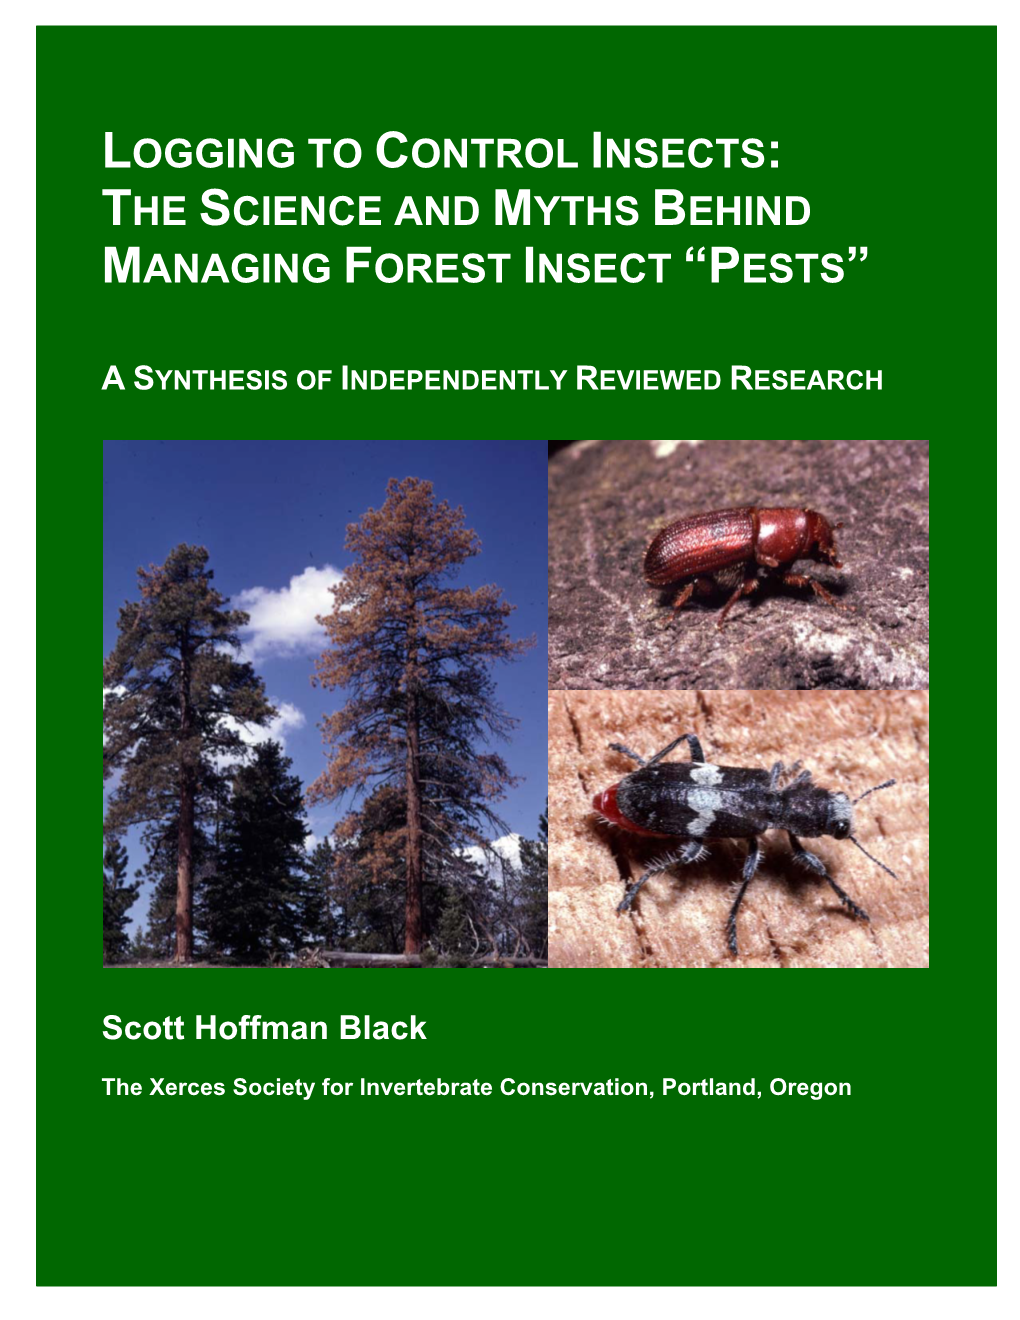 Logging to Control Insects: the Science and Myths Behind Managing Forest Insect “Pests”